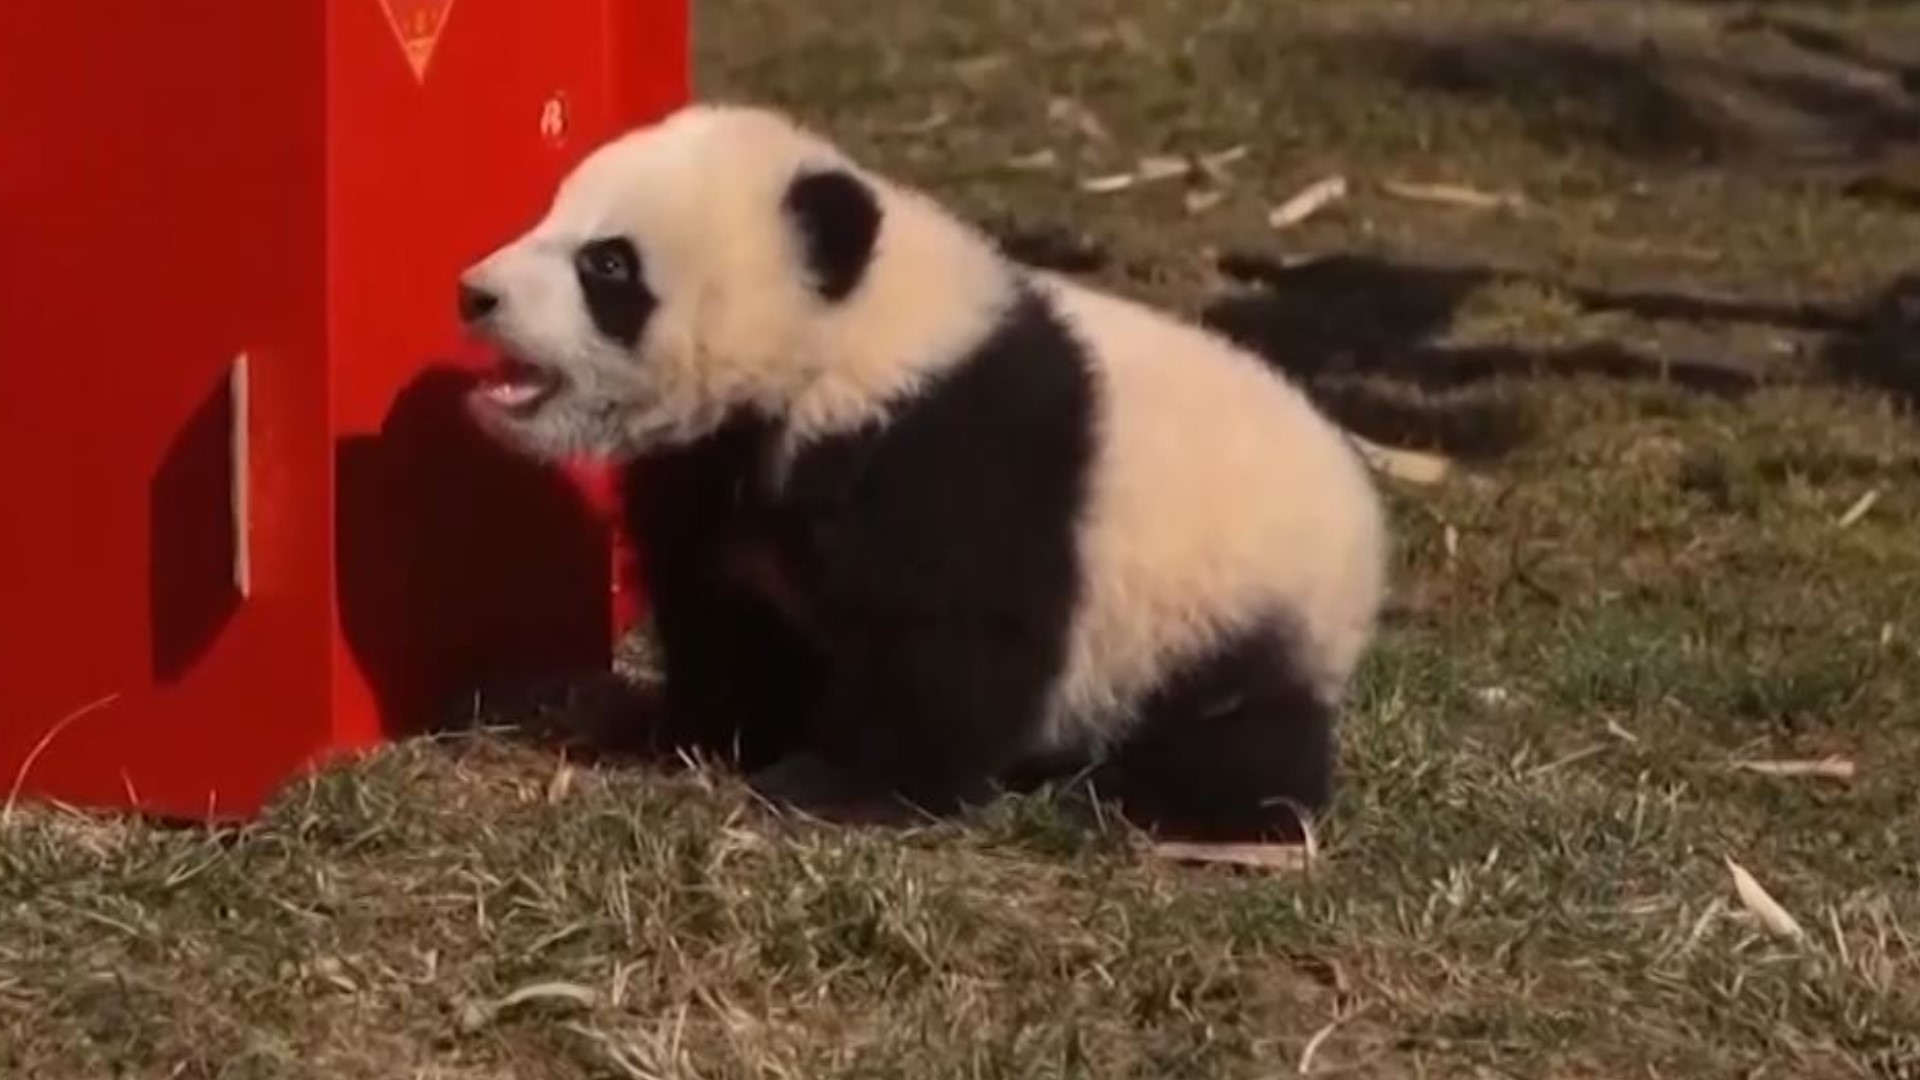 10 panda cubs made their debut at a panda reserve in China ahead of the Lunar New Year.